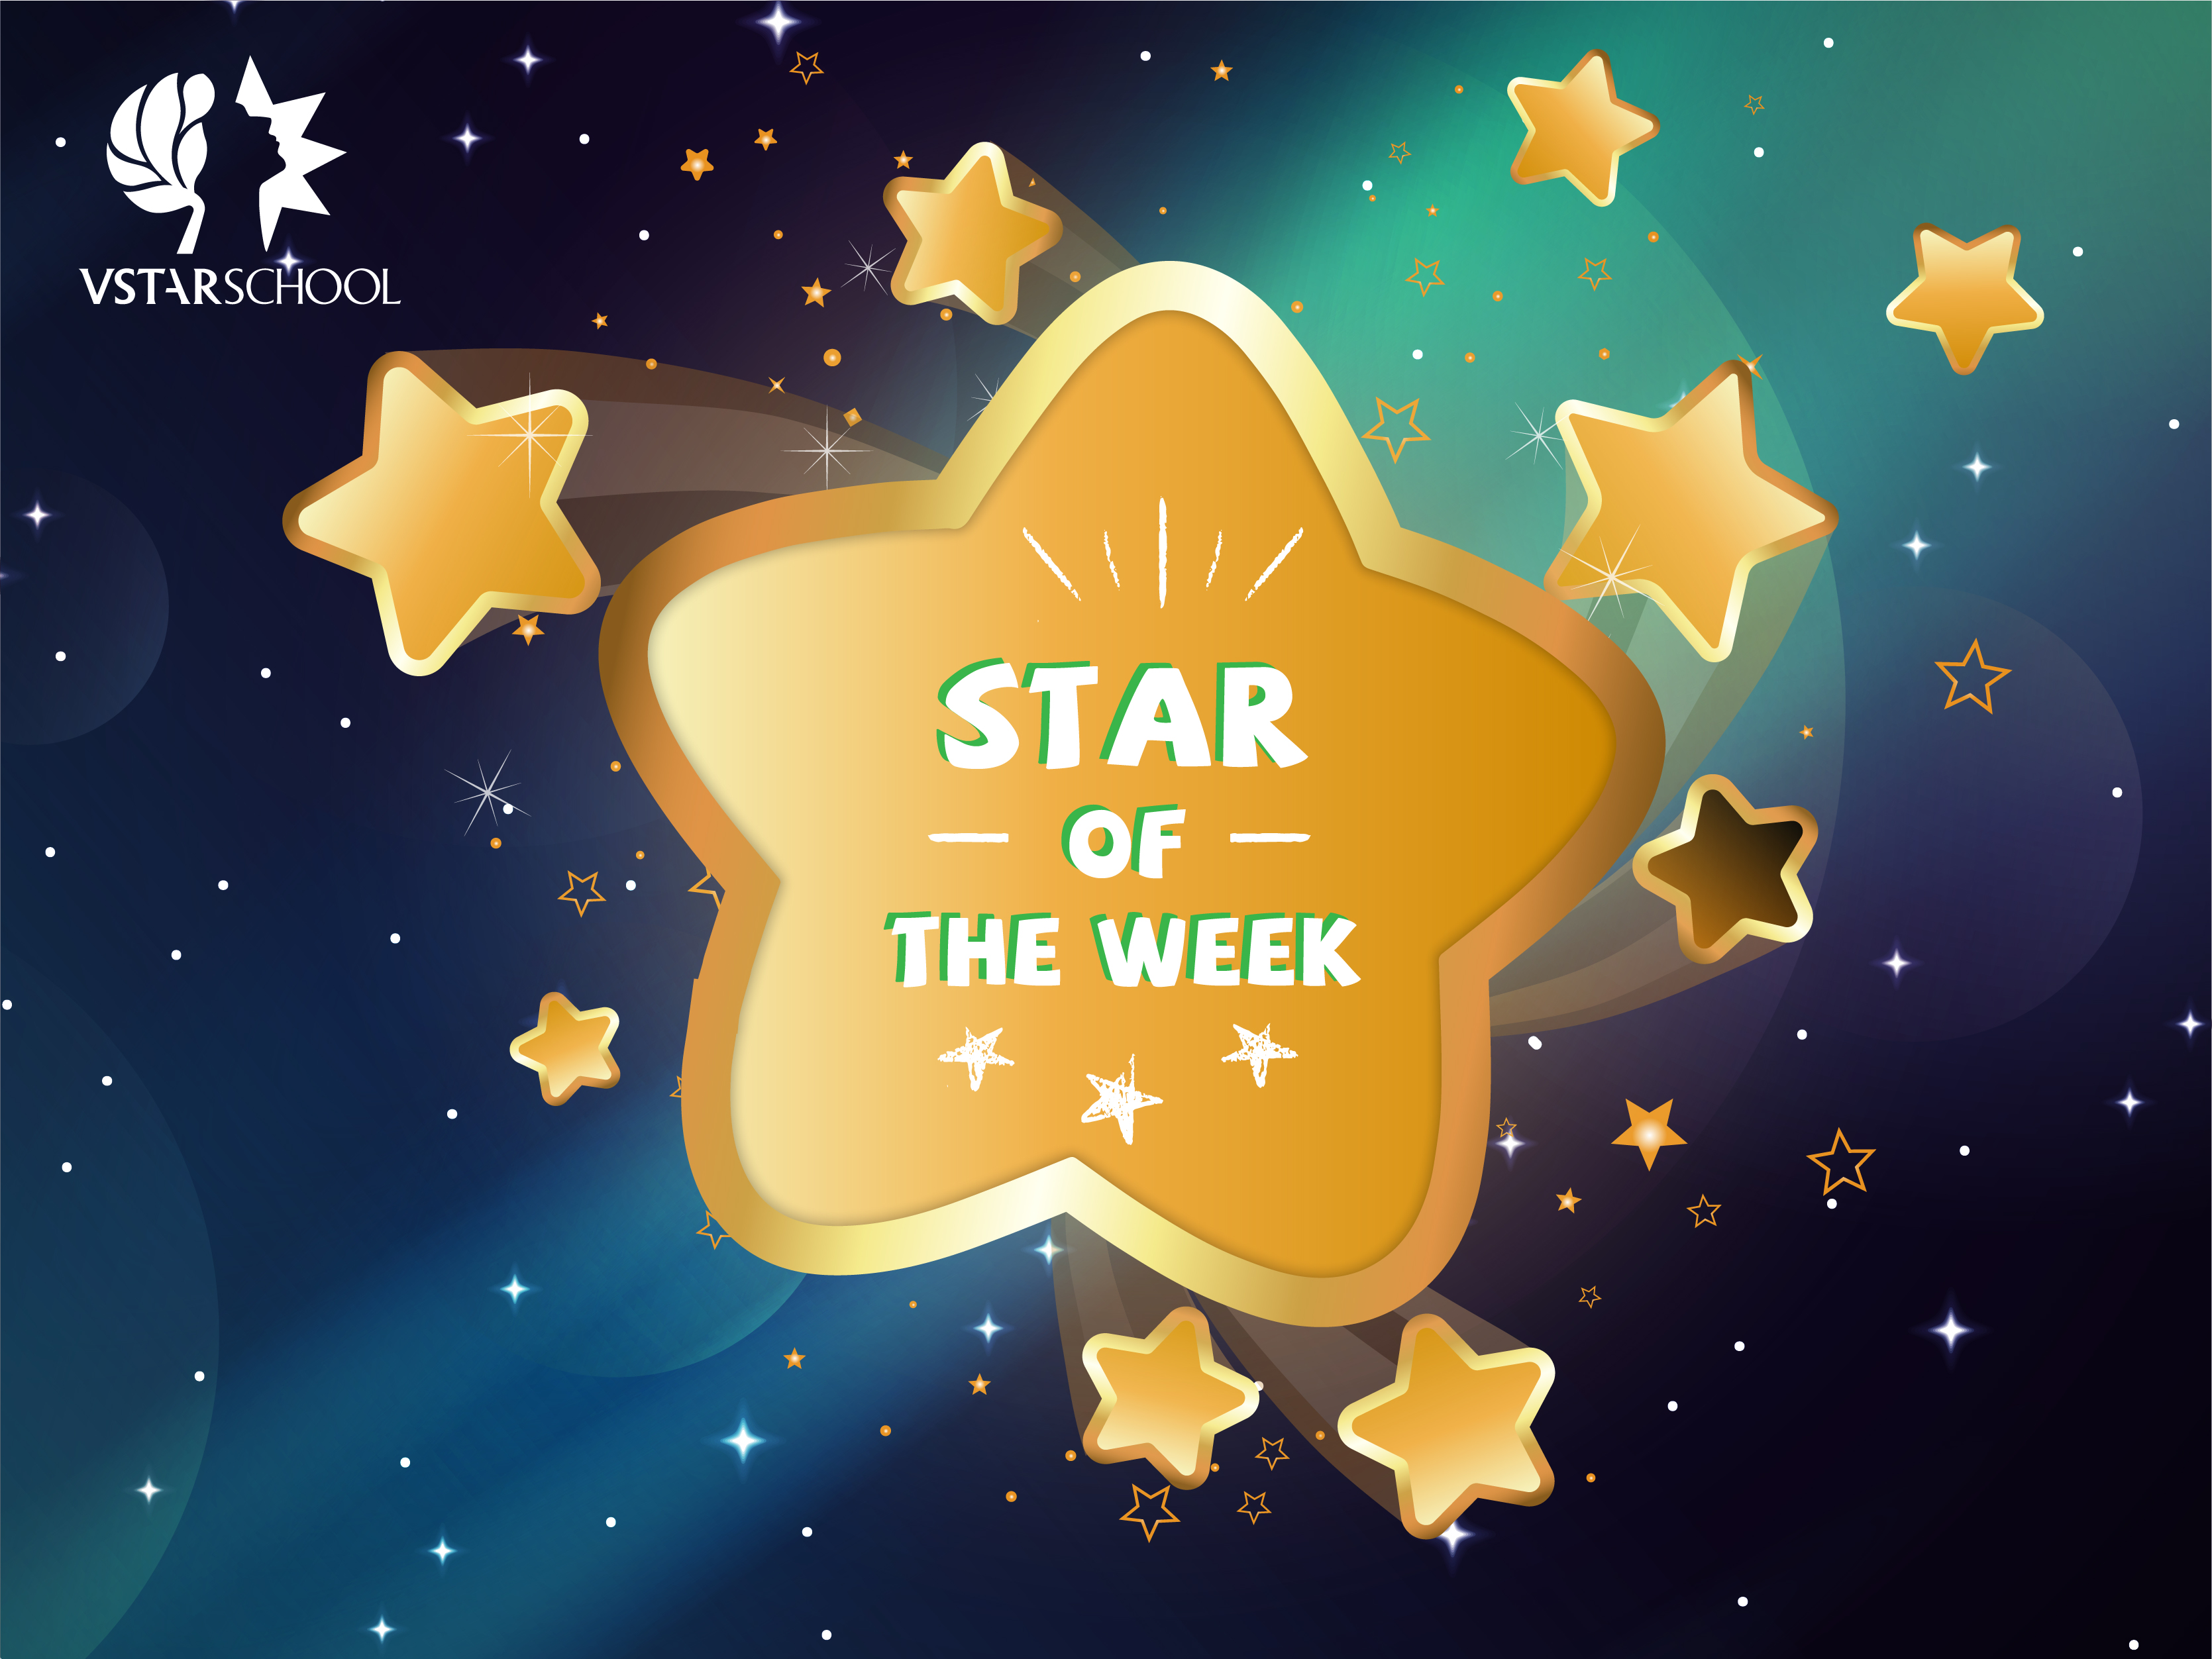 STAR OF THE WEEK TUẦN 4 - 06/2020